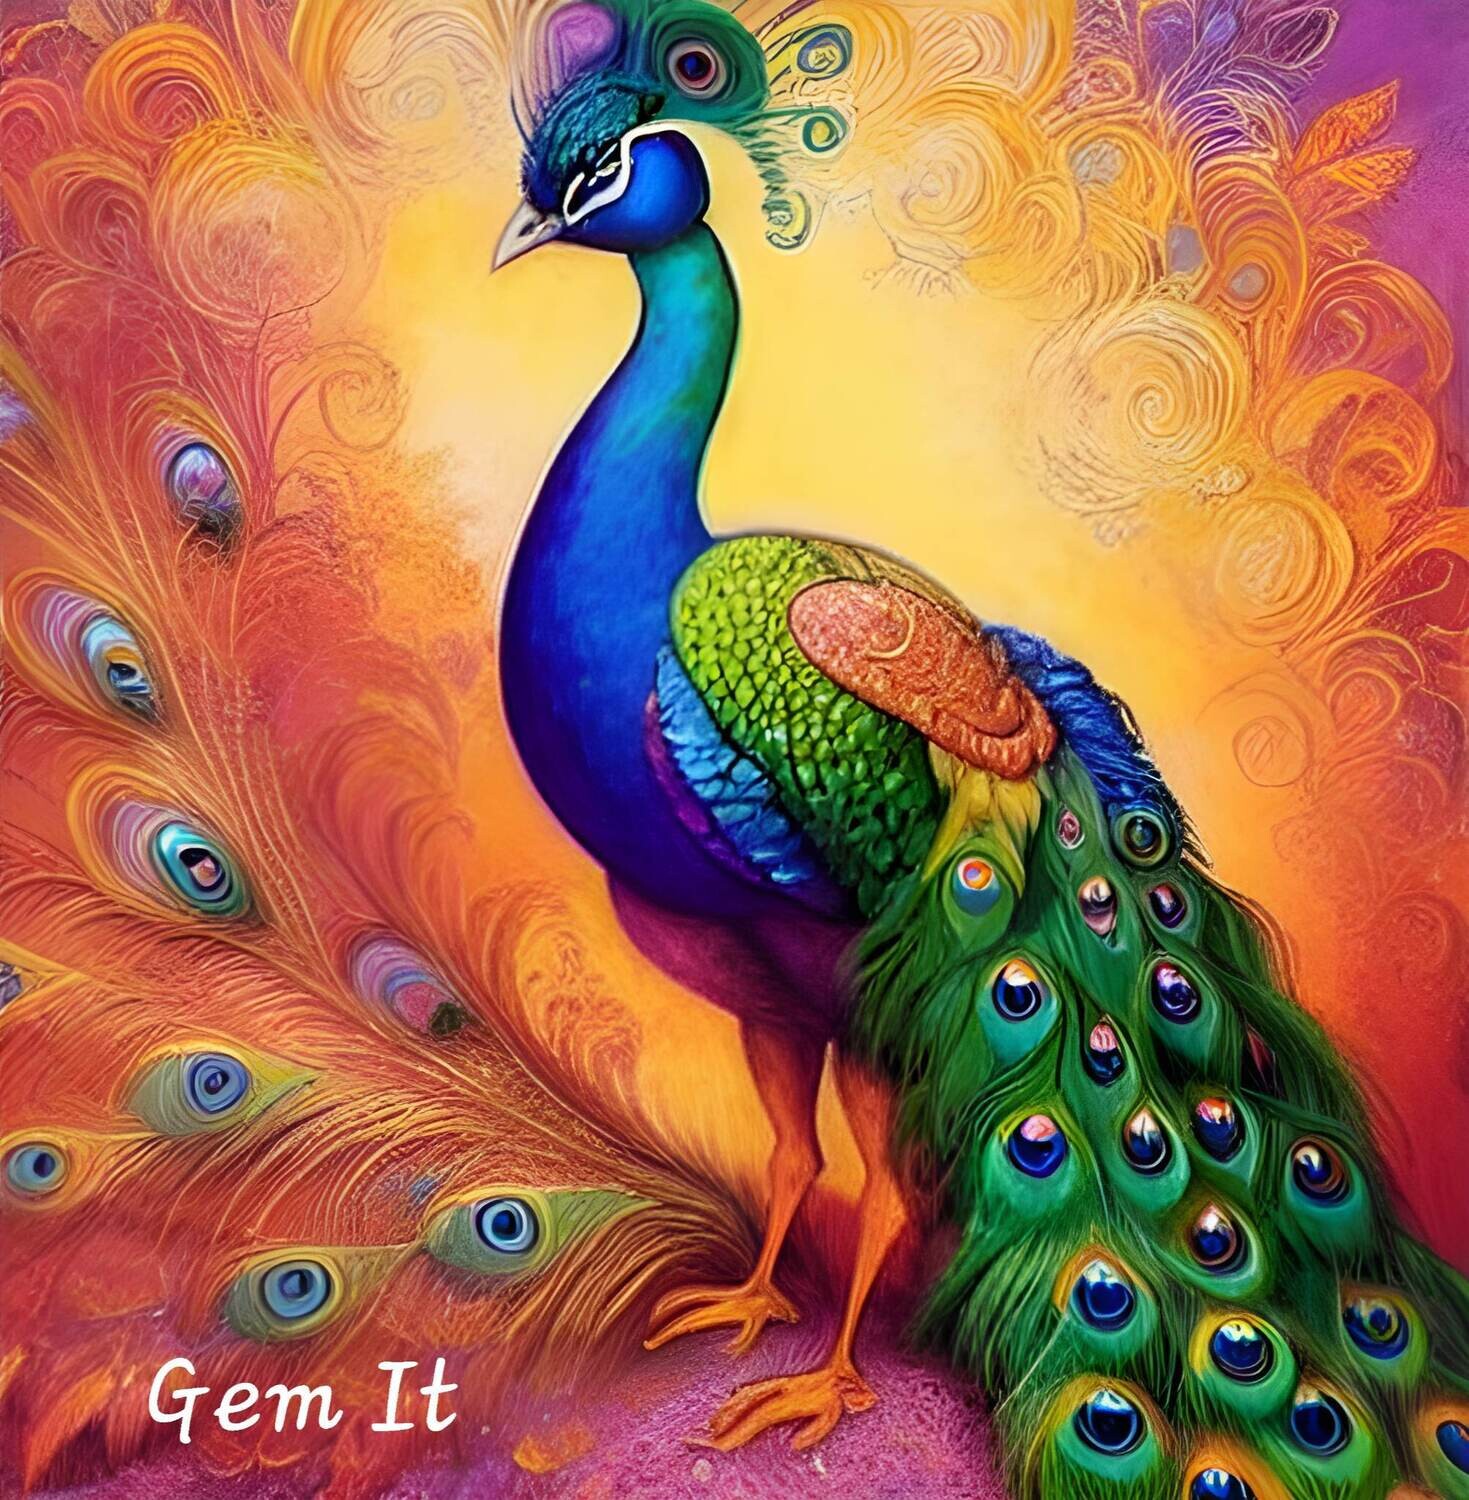 Peacock 175 - Full Drill Diamond Painting - Specially ordered for you. Delivery is approximately 4 - 6 weeks.